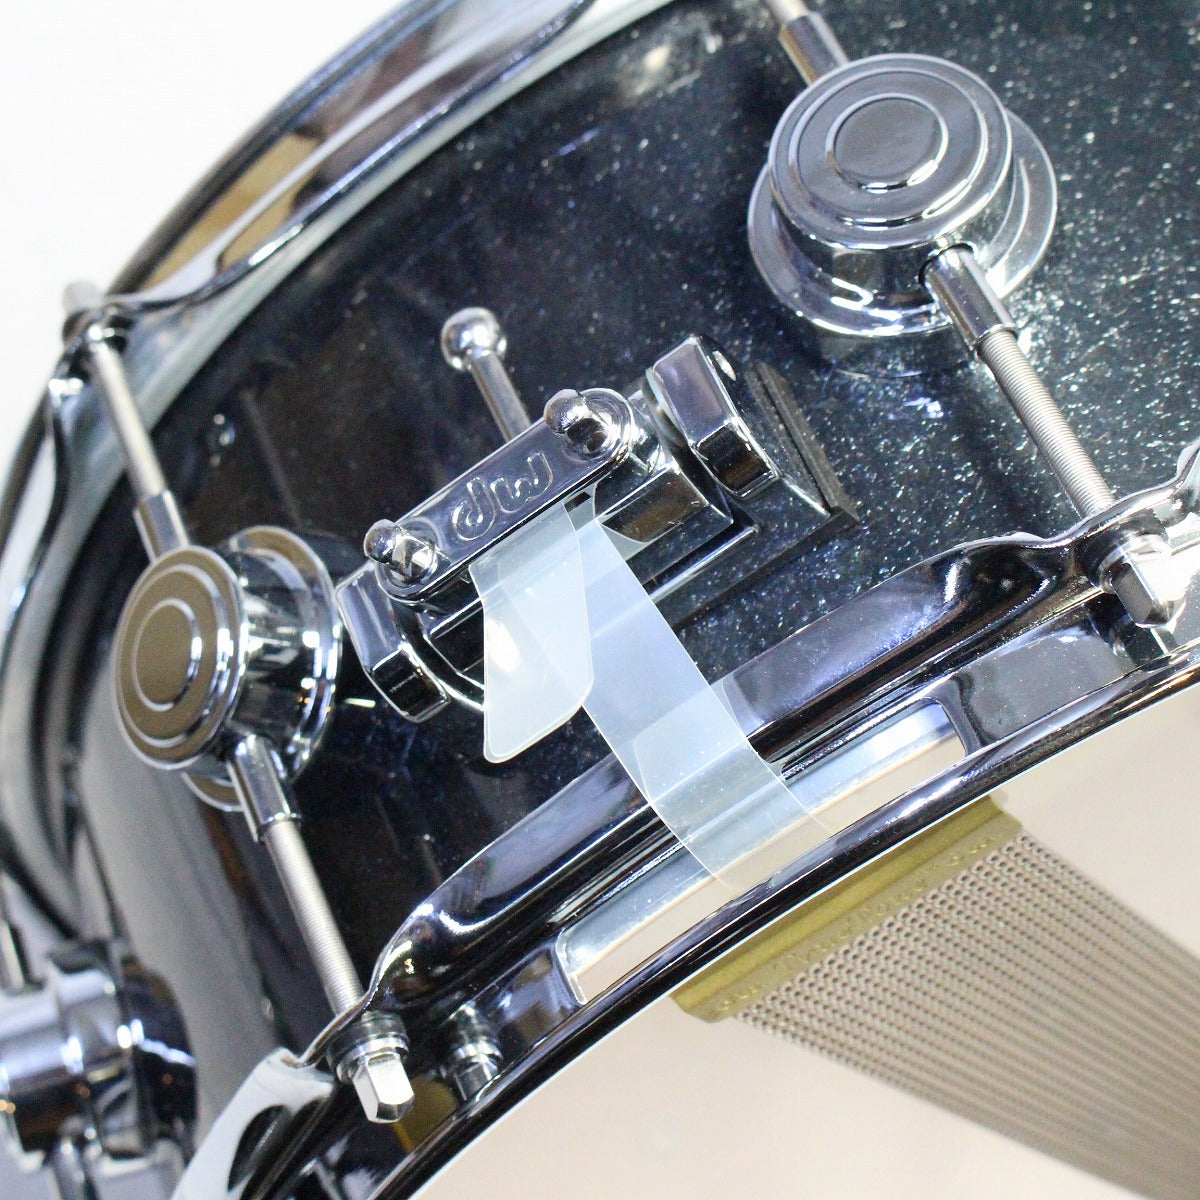 USED DW / DW-CL1455S/FP-BKIC/C Collectors Maple Black Ice 14x5.5 Collectors Maple Snare Drum [08]